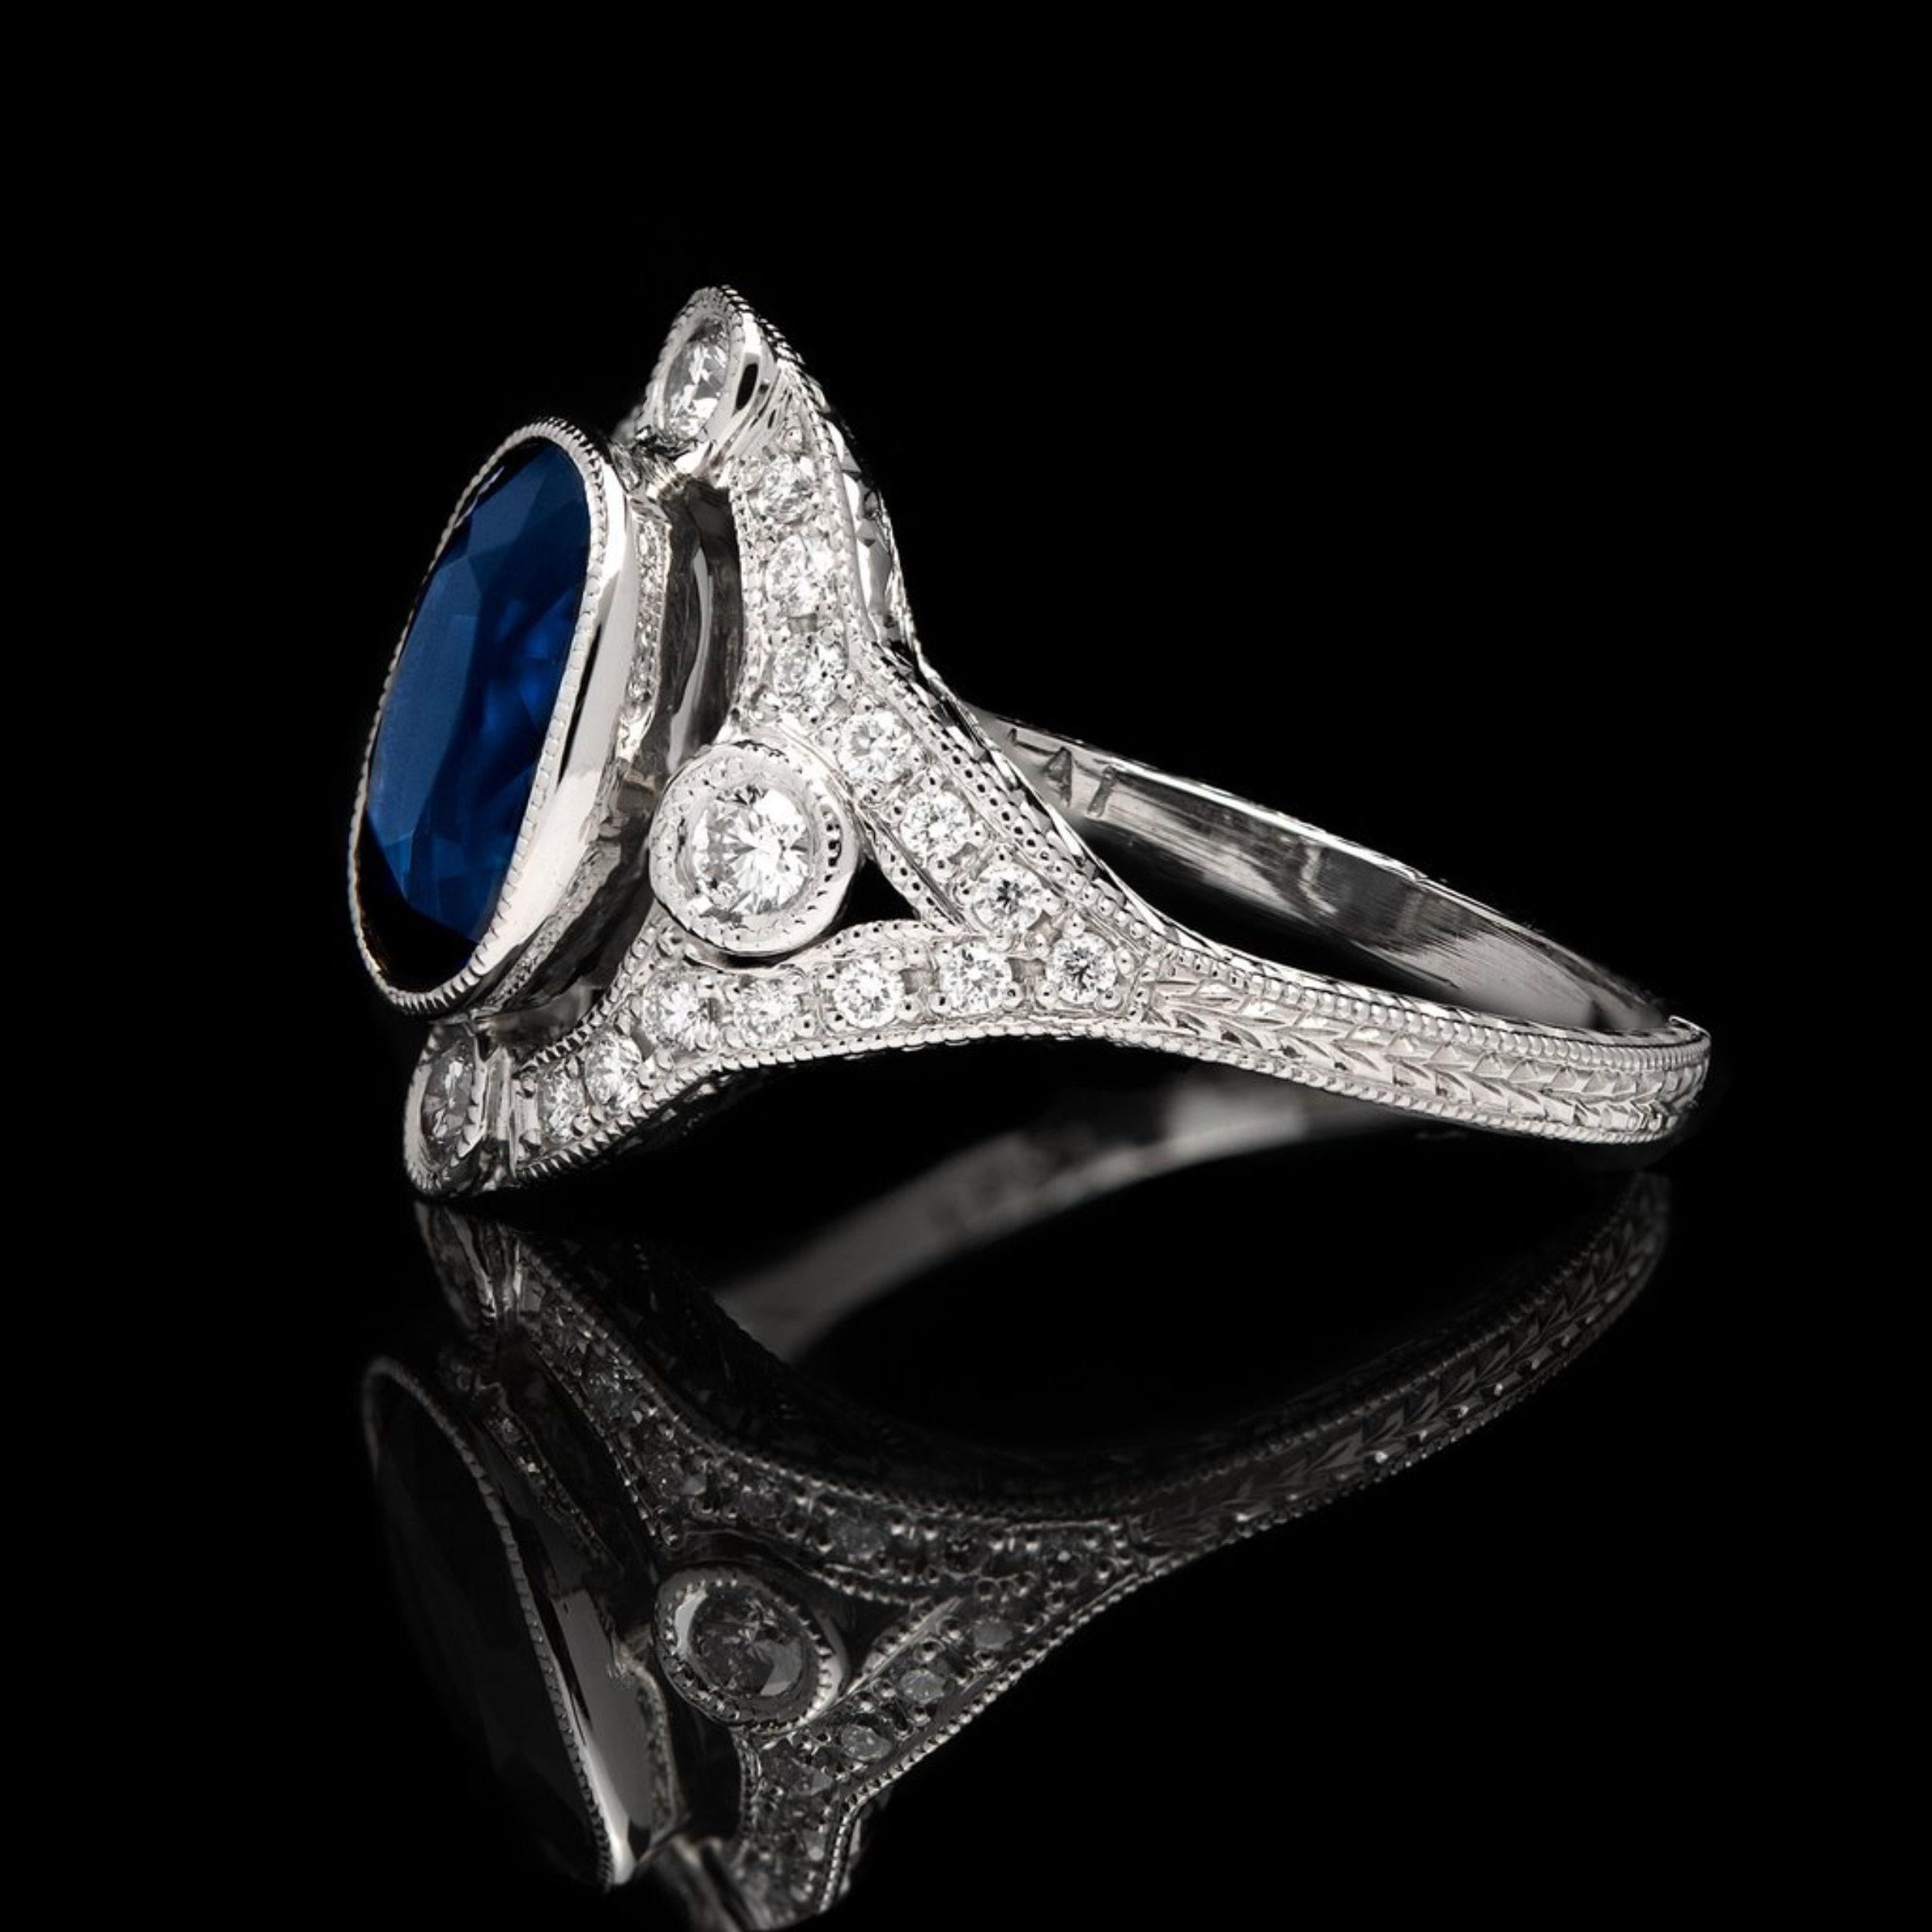 For Sale:  4 Carat Oval Cut Sapphire Diamond Engagement Ring, Blue Sapphire Wedding Ring 3